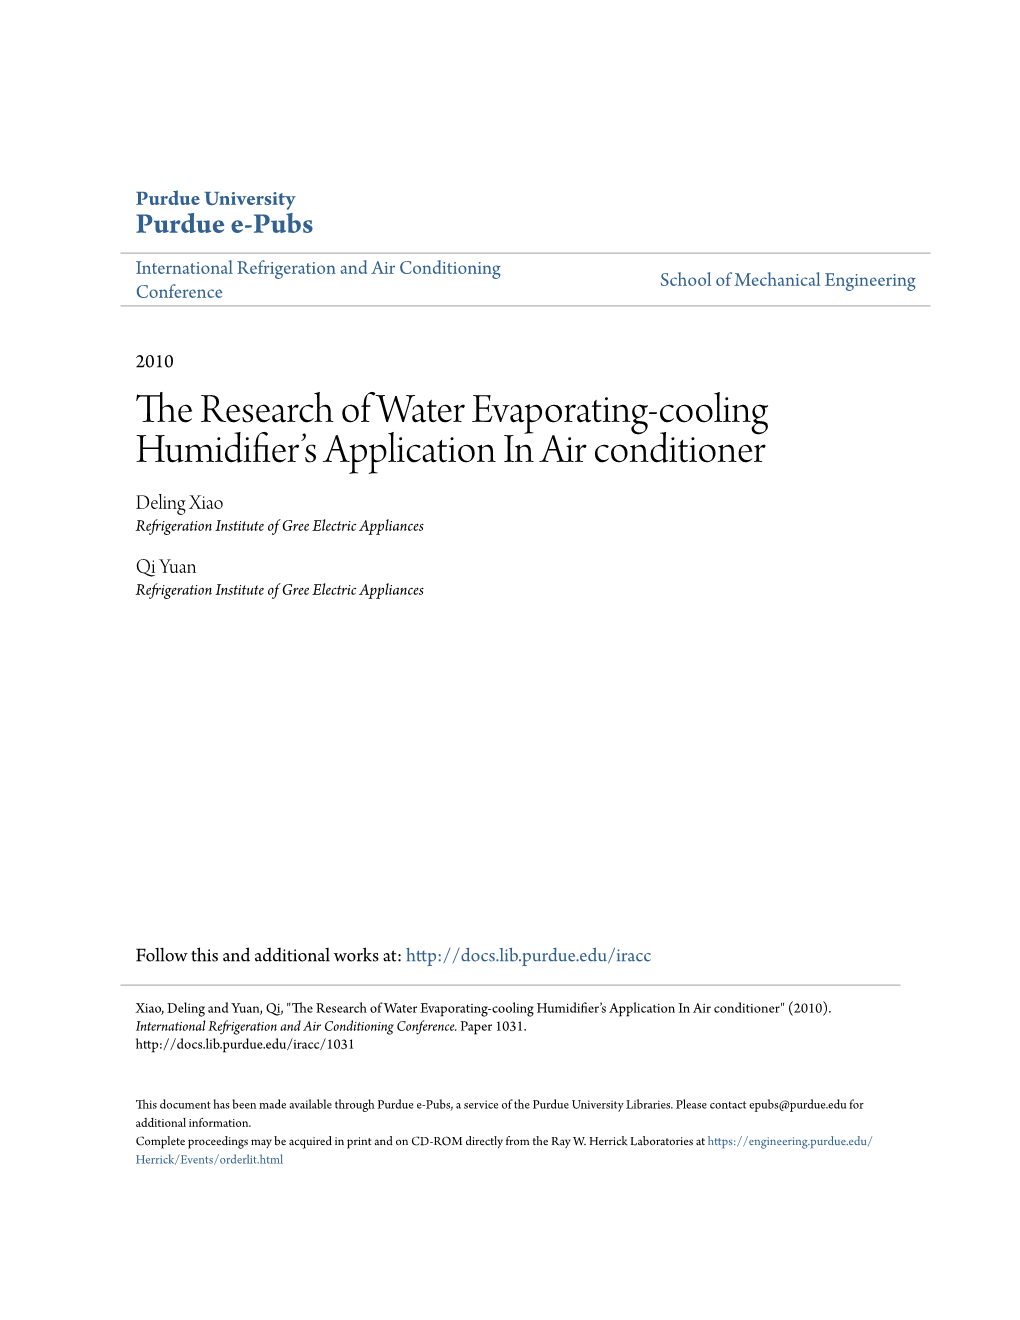 The Research of Water Evaporating-Cooling Humidifierâ•Žs